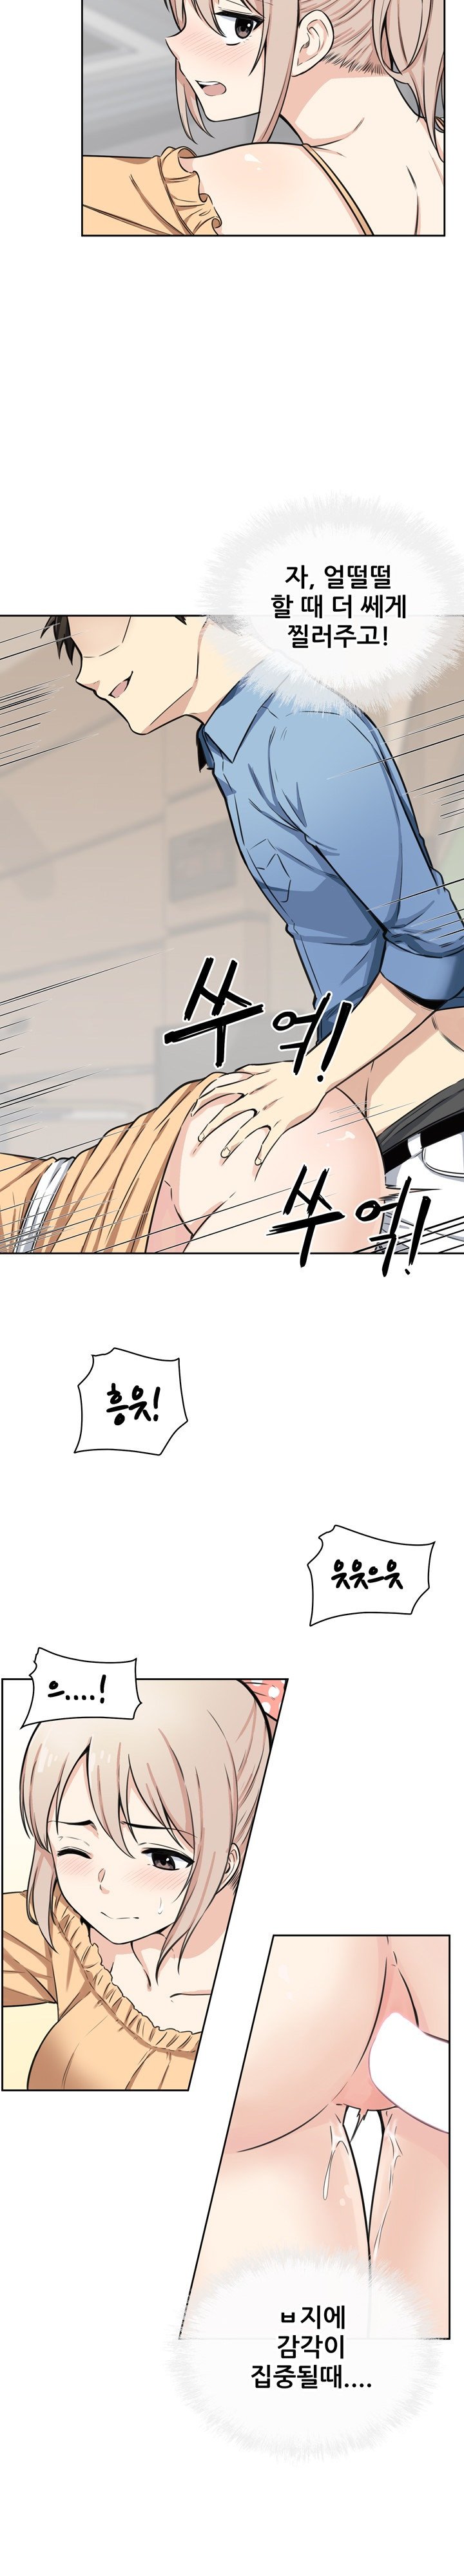 the-ark-is-me-raw-chap-38-26